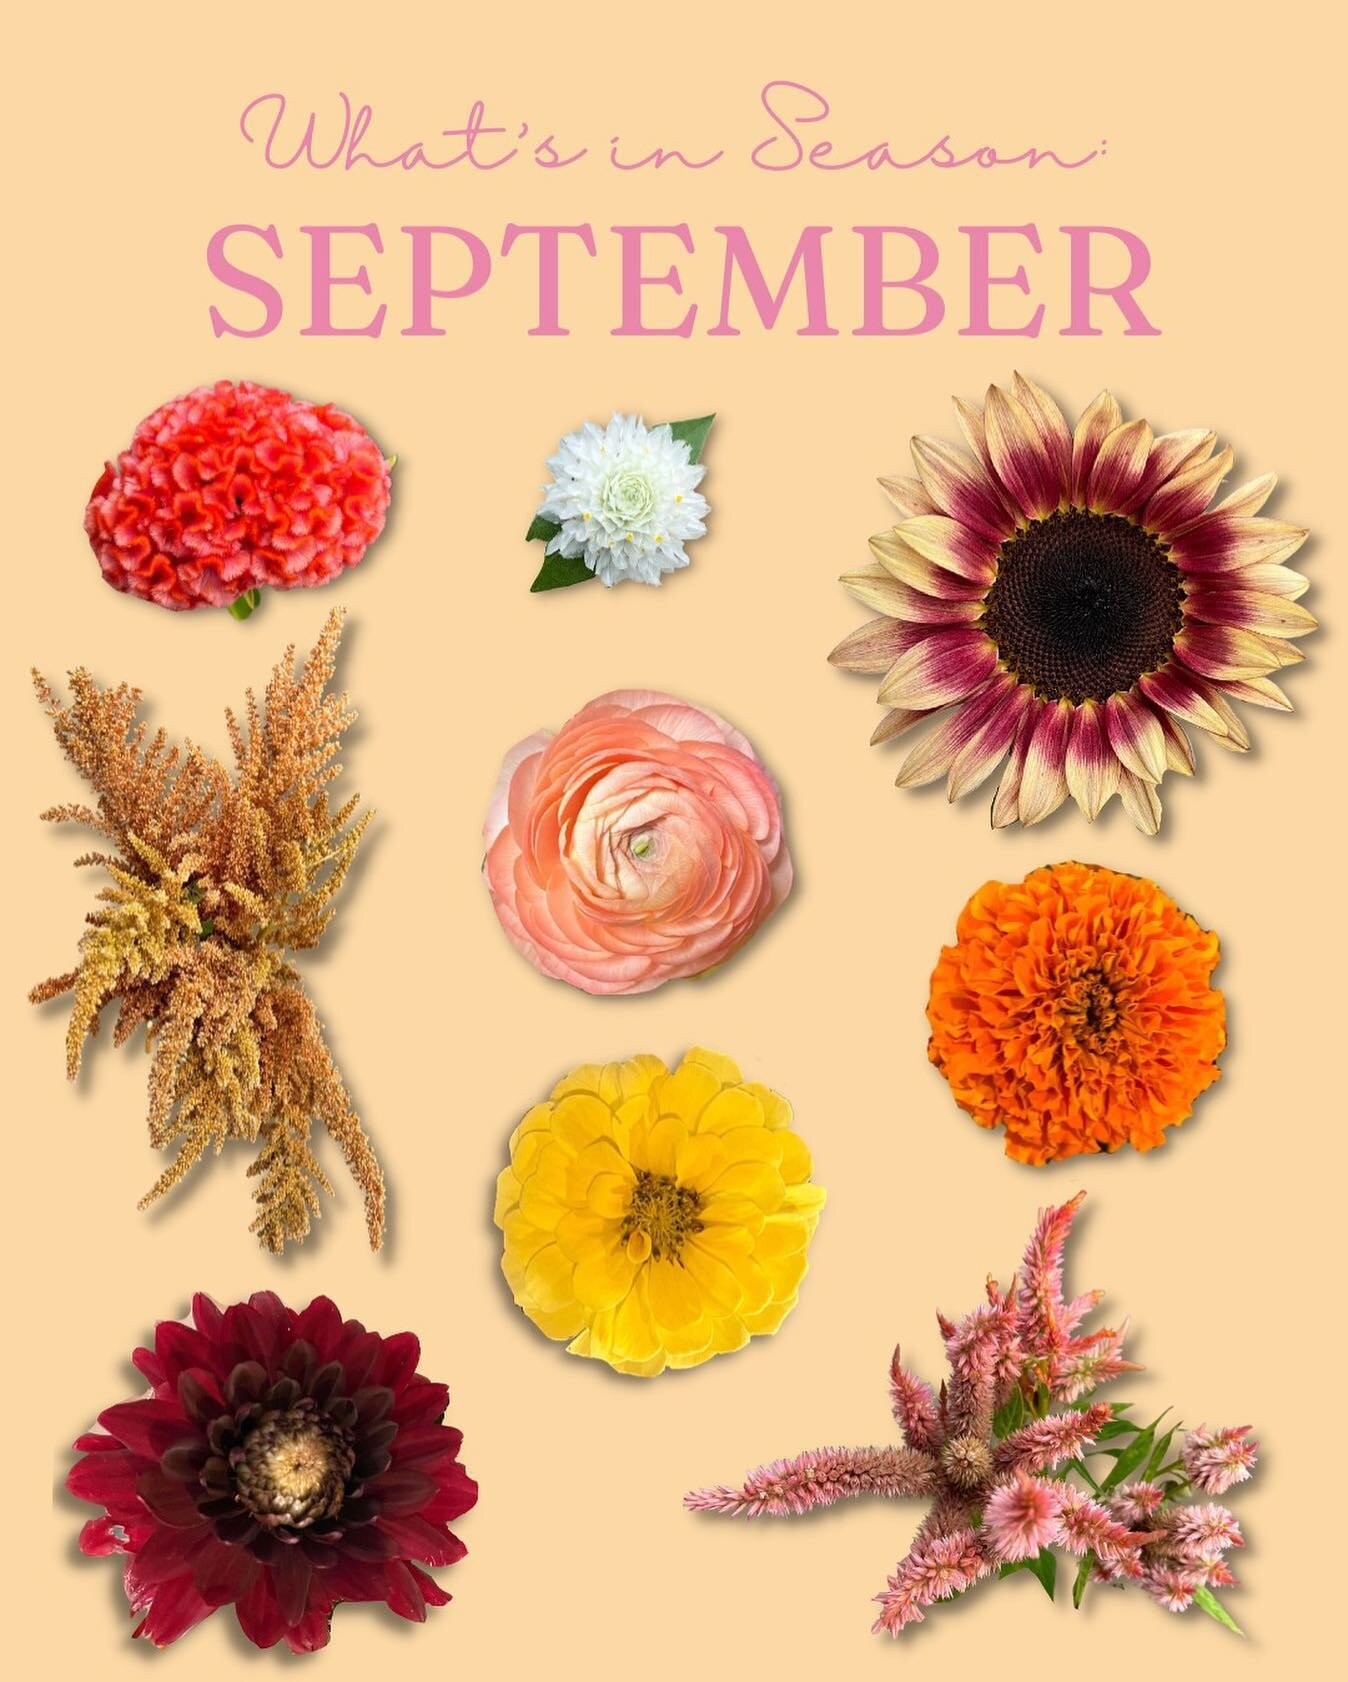 Are you excited for fall flowers or will you miss summer florals? 🌼

#stlbouquet #shopsmallbusiness #flowertruck #shopsmall #flowers #stl #buylocal